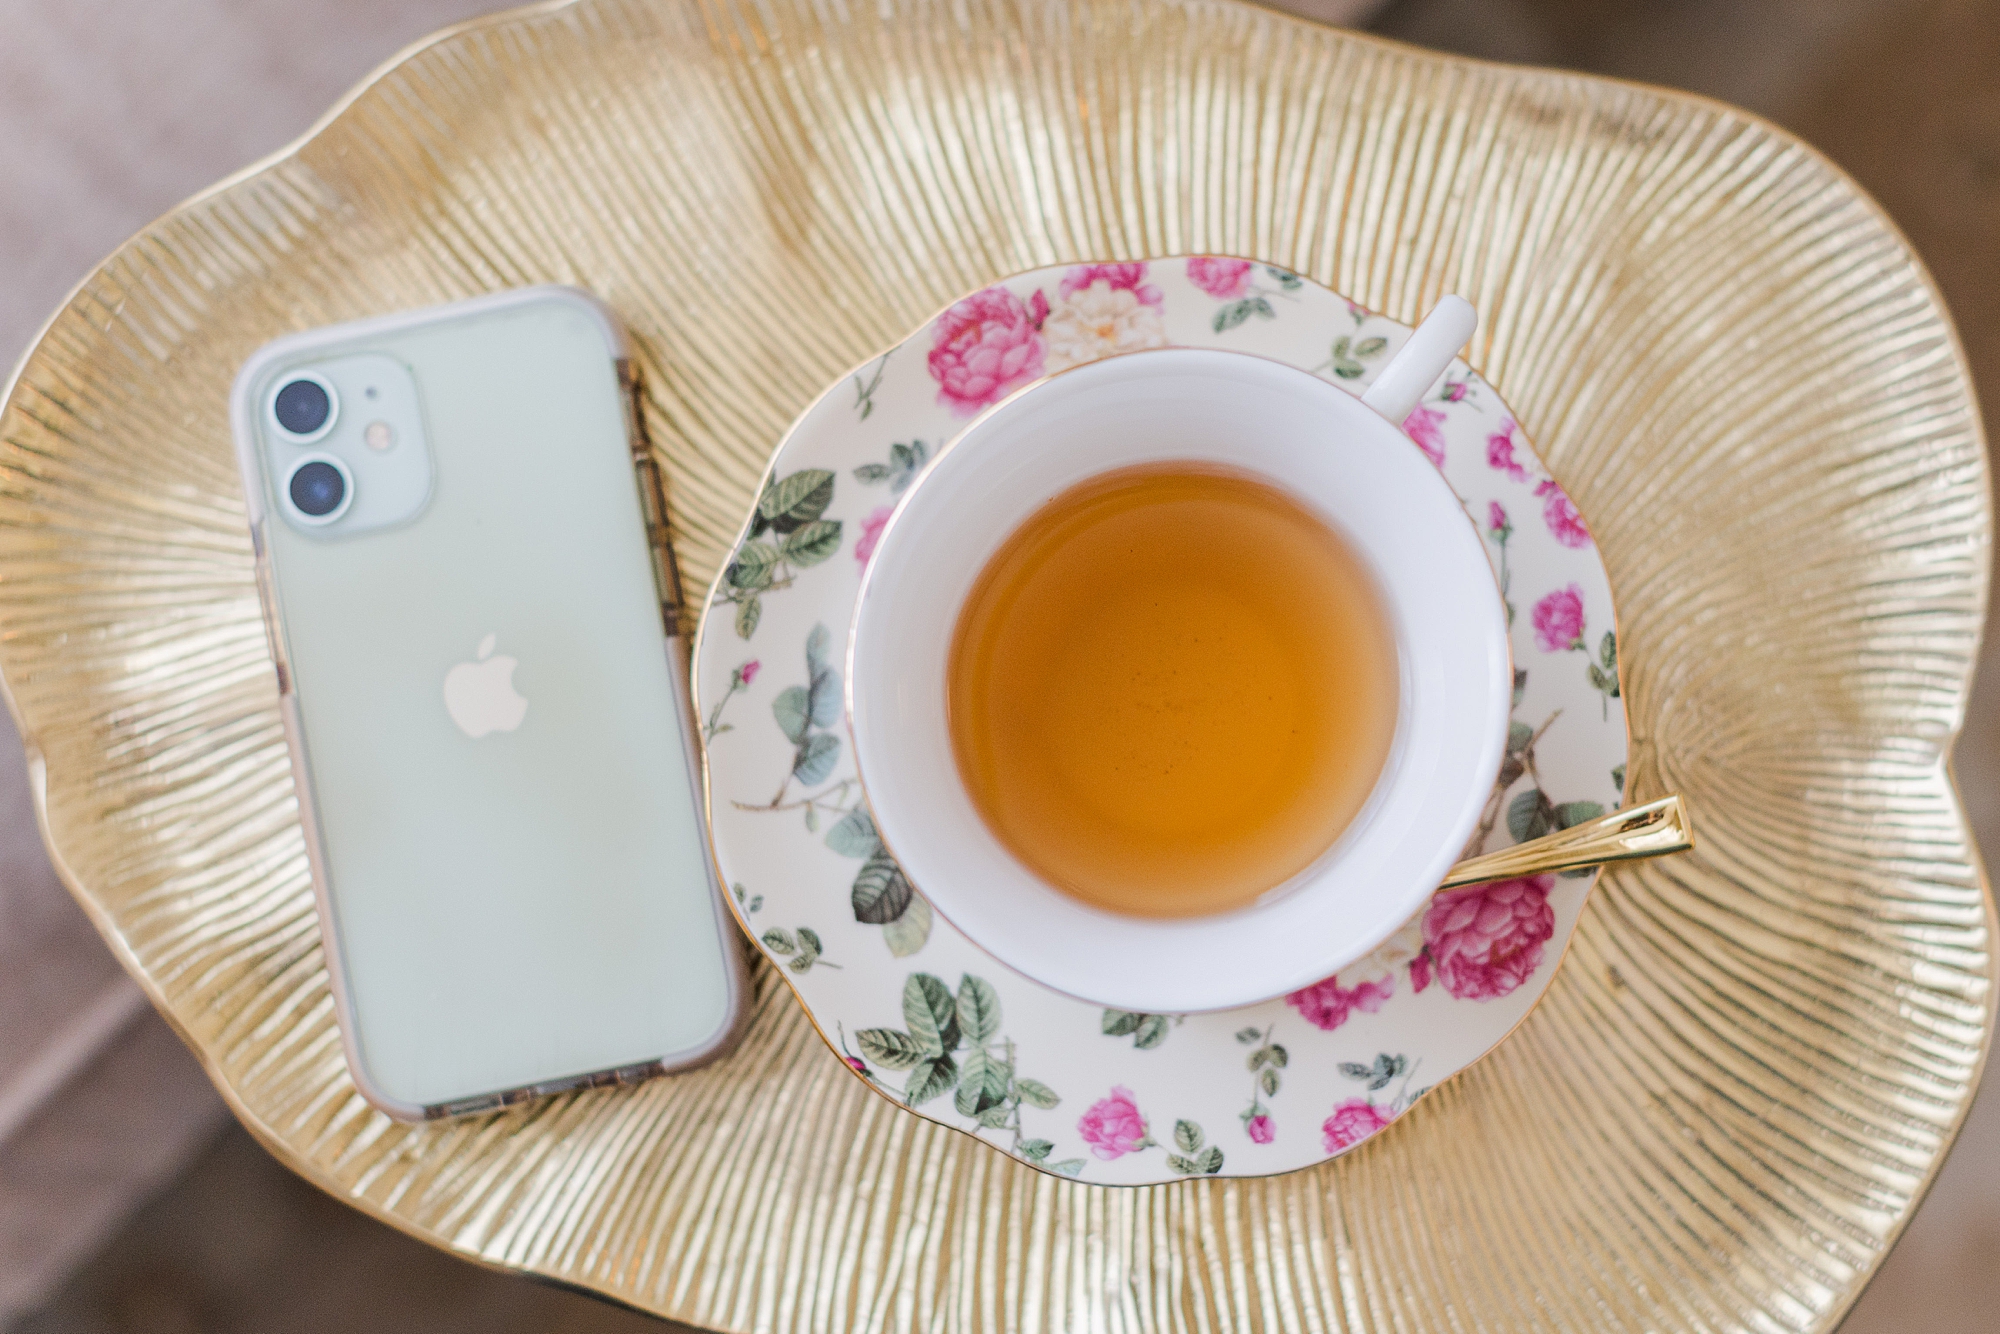 iPhone and cup of tea sit together on wicker basket